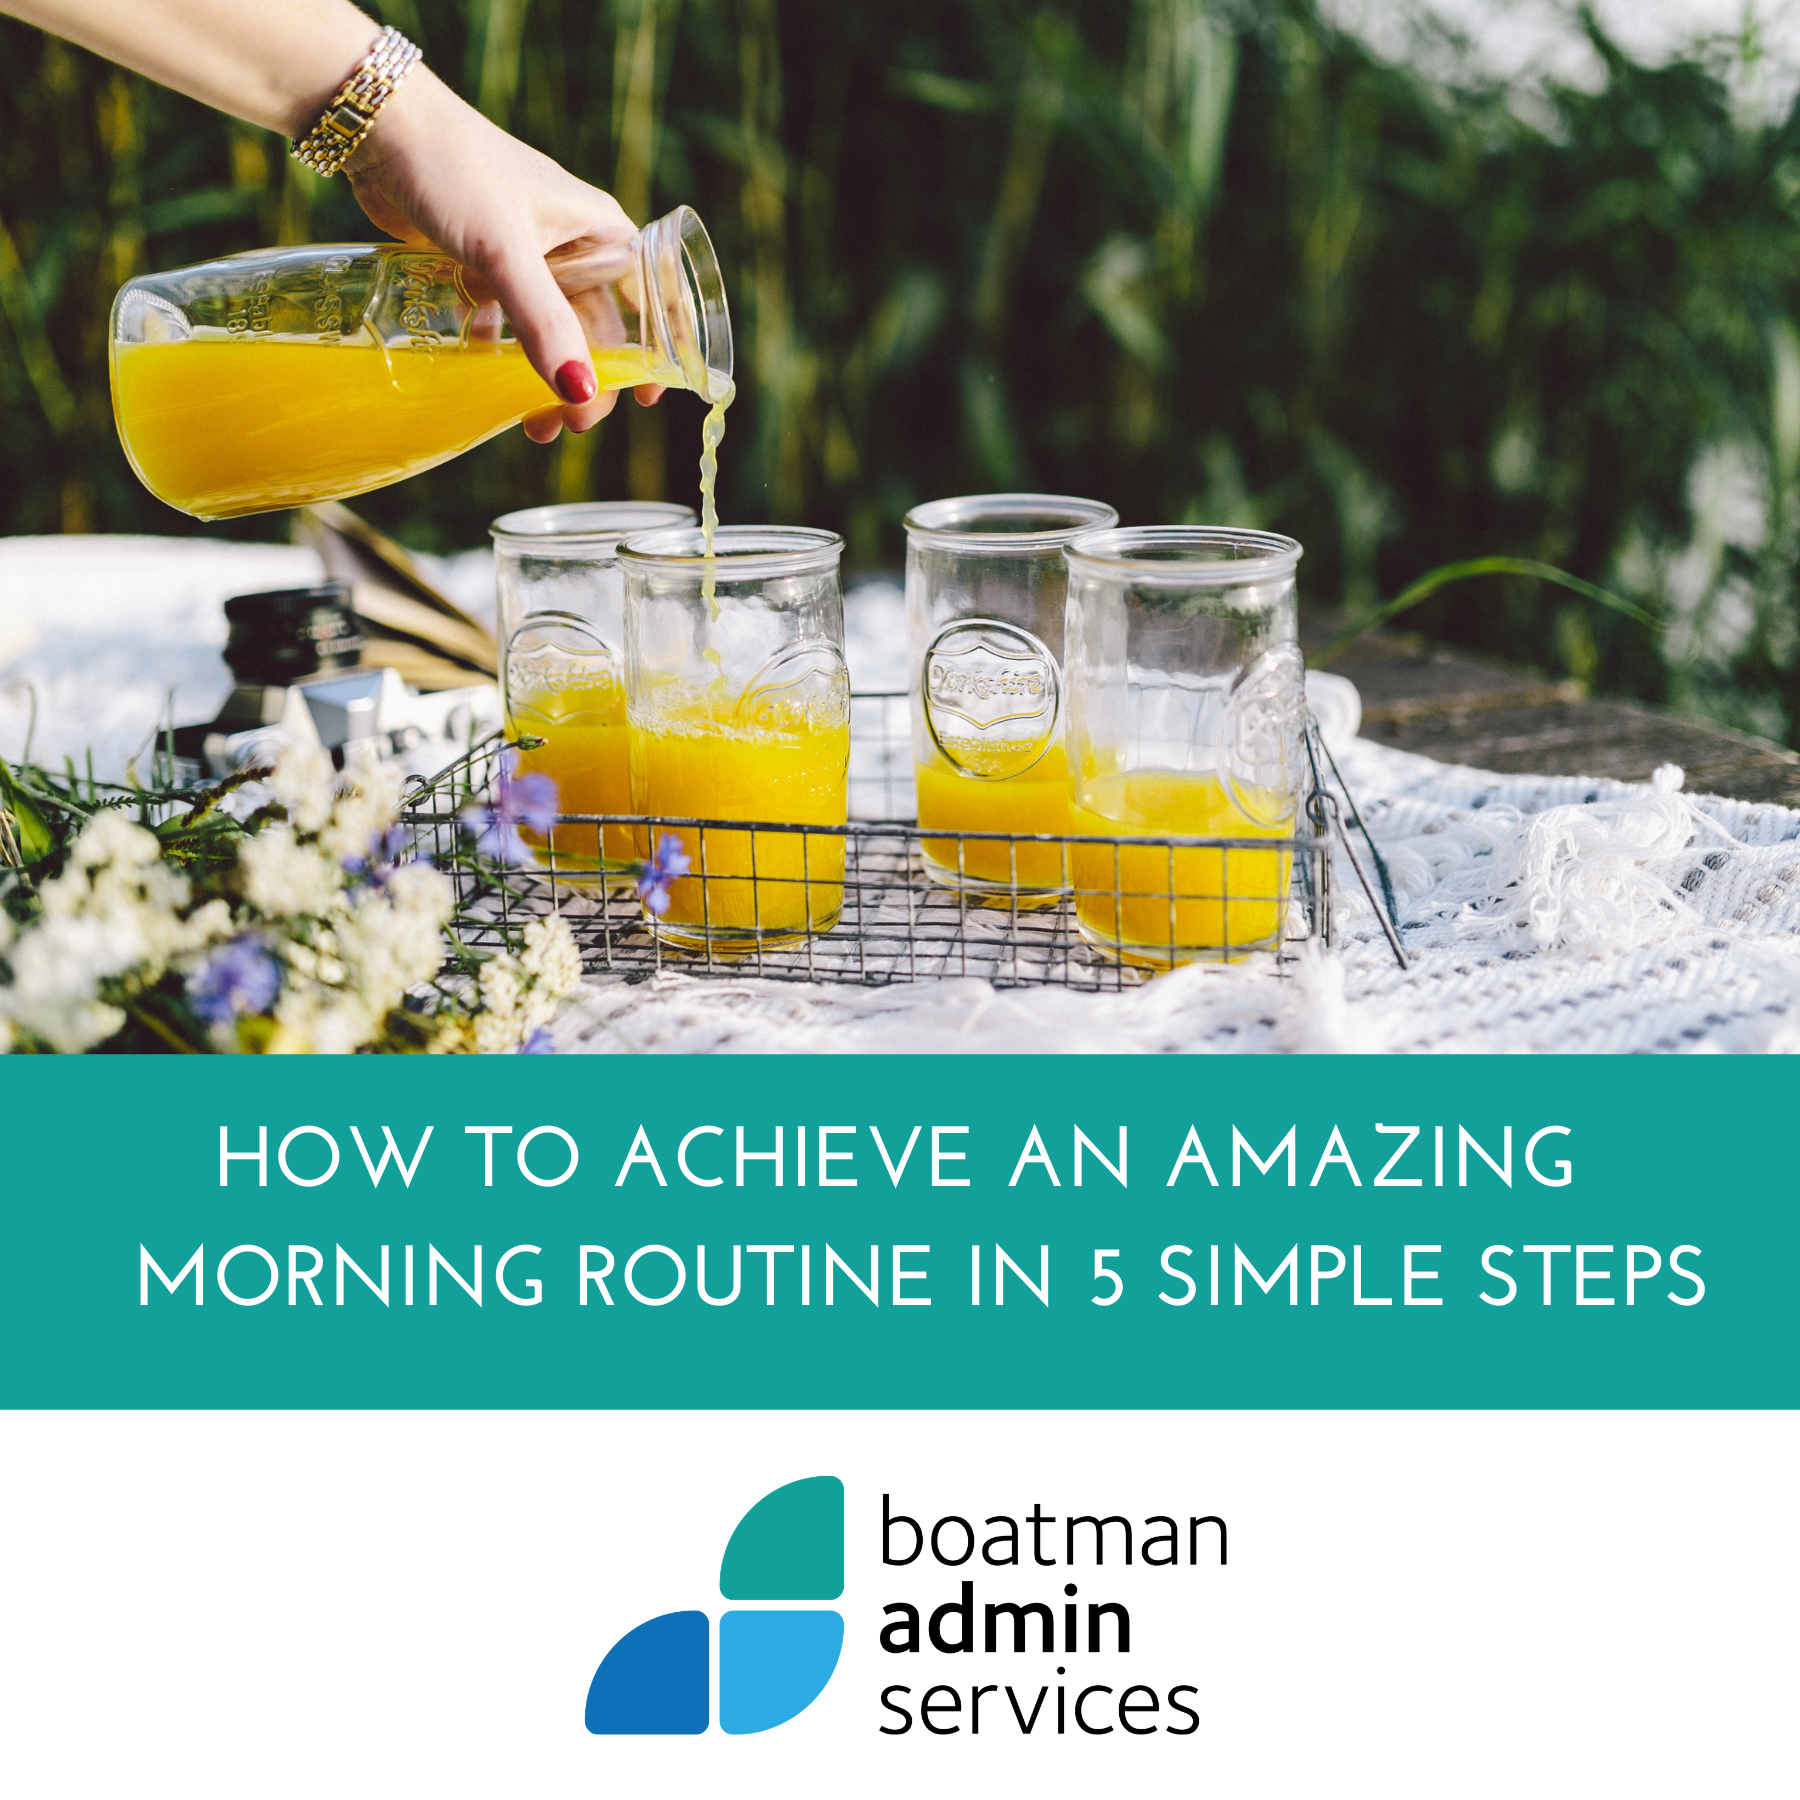 How to achieve an amazing morning routine in 5 simple steps